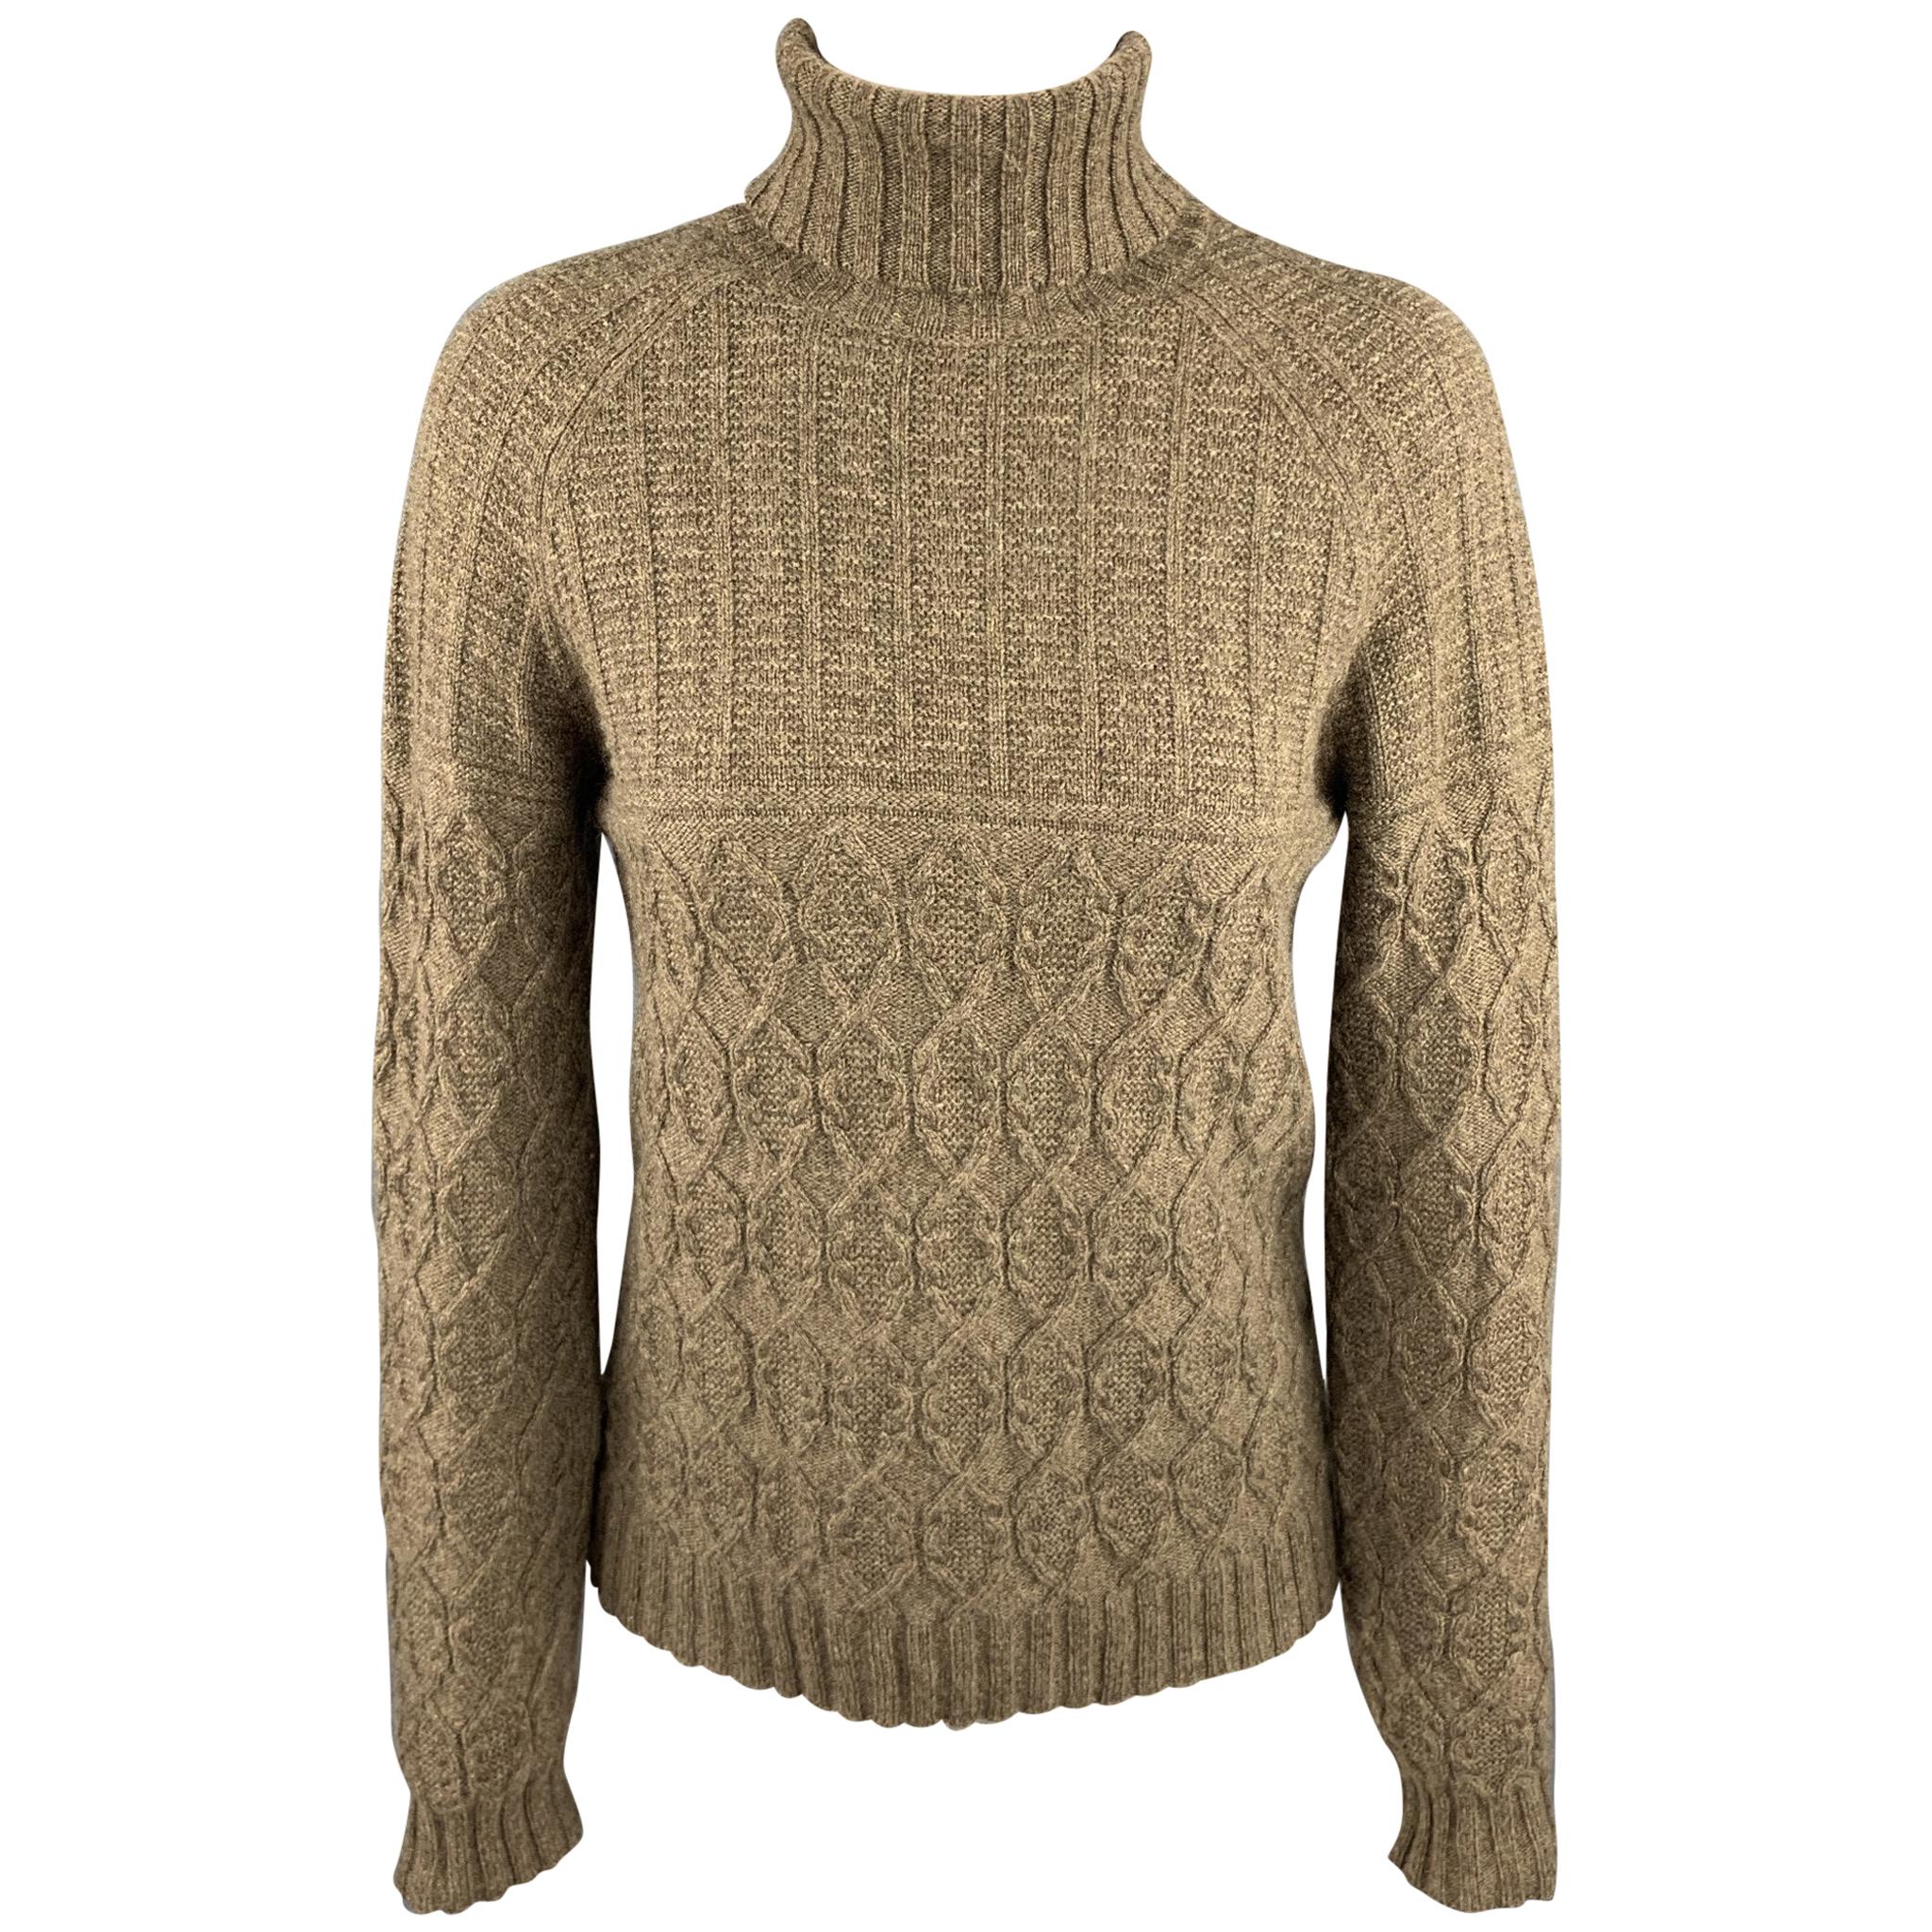 RALPH LAUREN Size M Taupe Knitted Cashmere Turtleneck Pullover